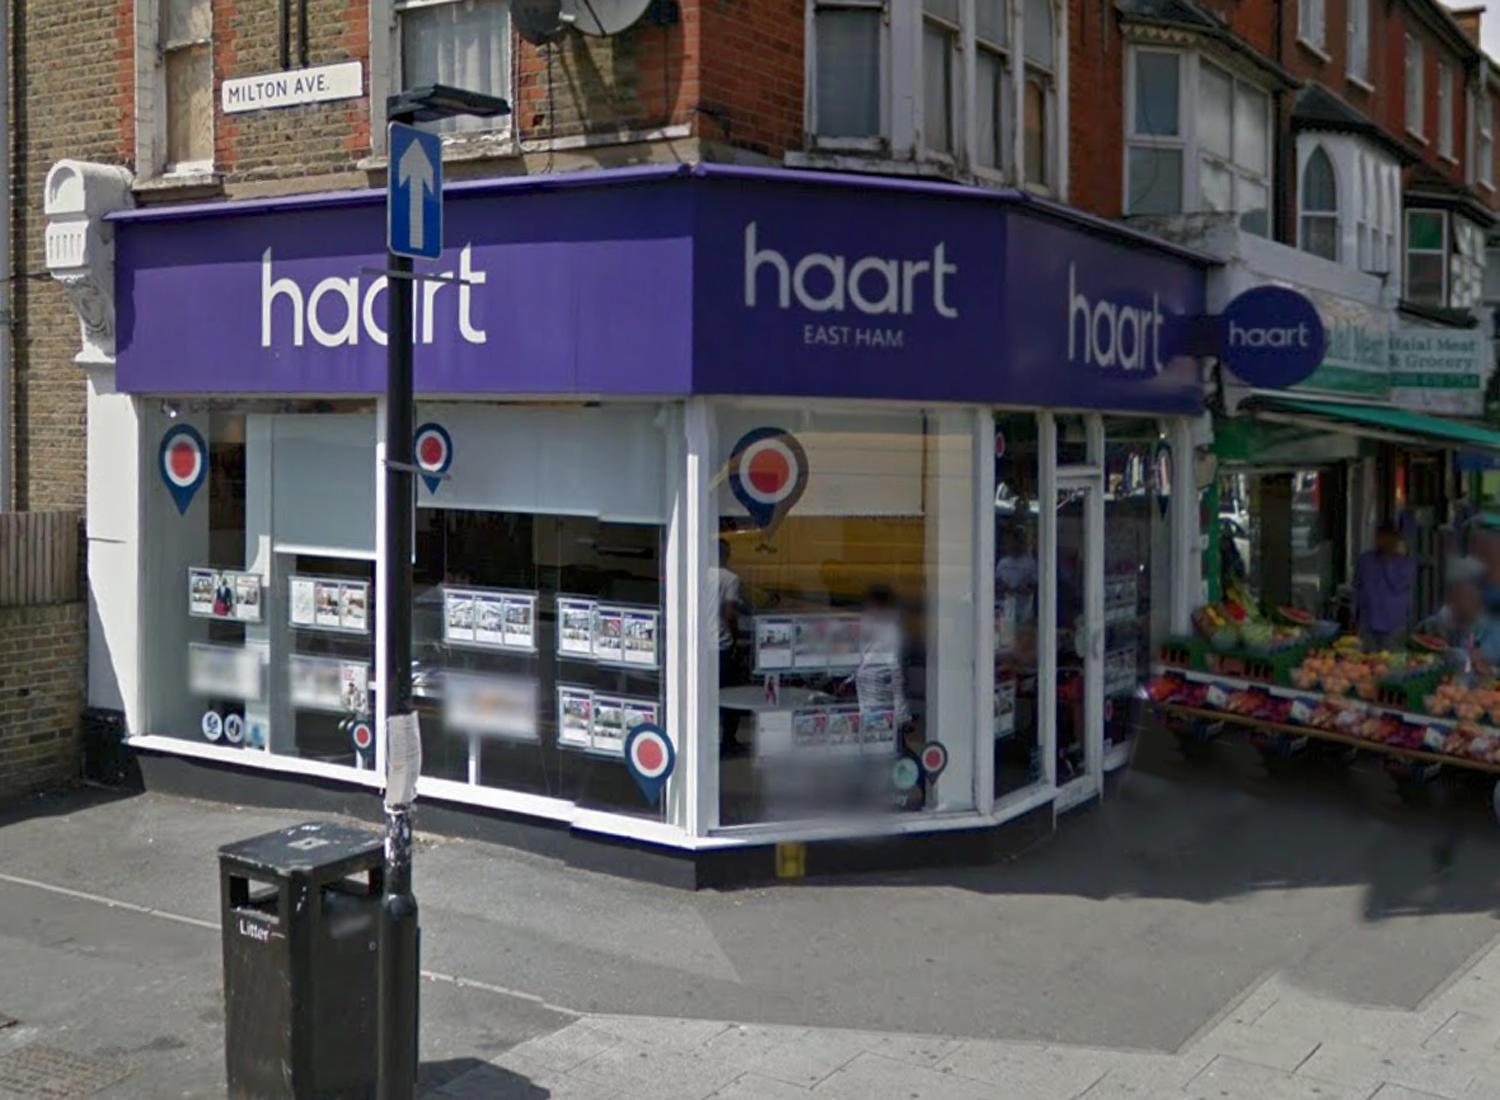 haart Estate And Lettings Agents East Ham East Ham 020 4512 8365